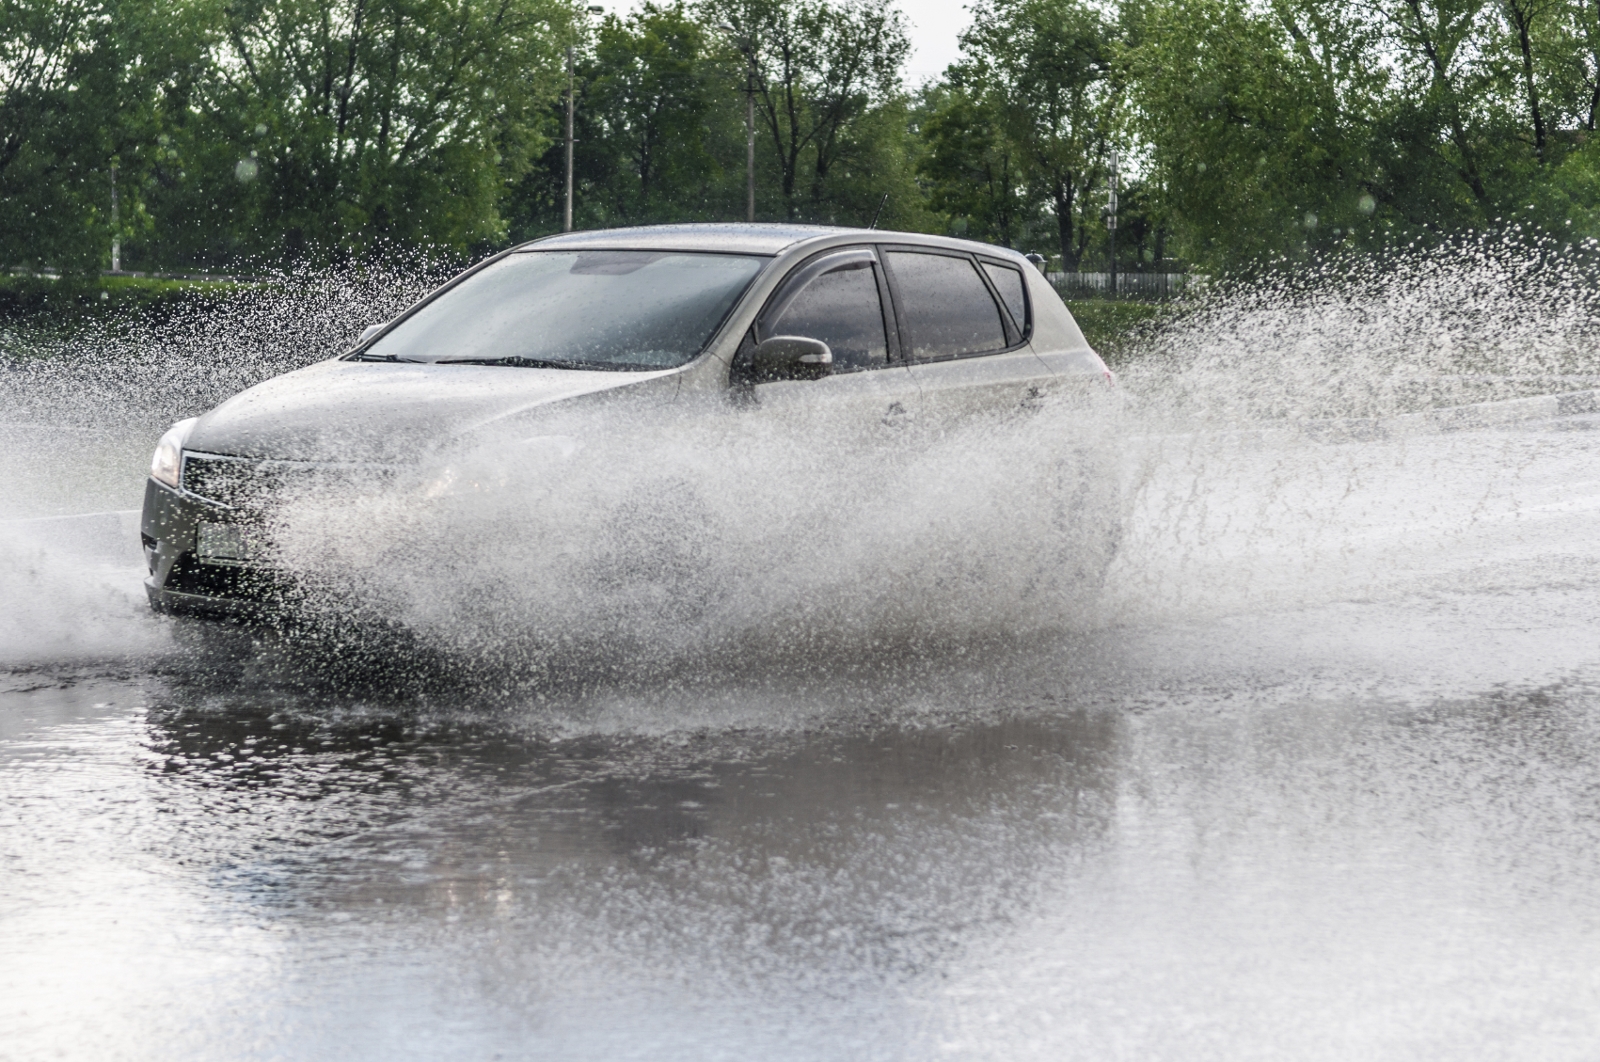 Driving in floods